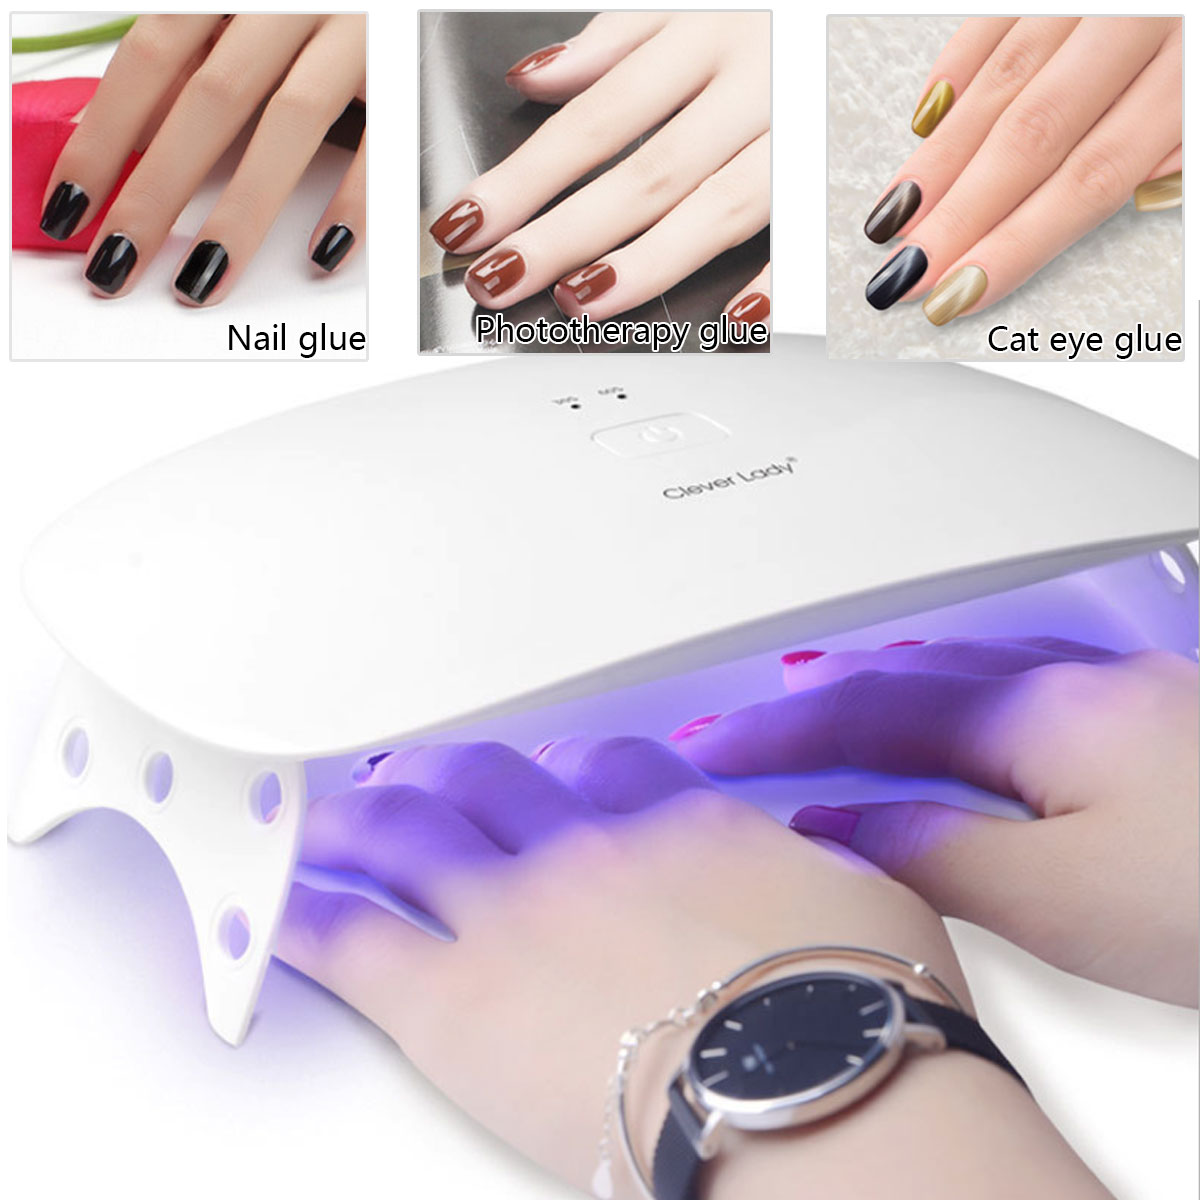 SUN5-UV-Lamp-Beads-Nail-Lamp-24W-LED-Gel-Dryer-Cure-Manicure-Machine-Curing-Timer-1493450